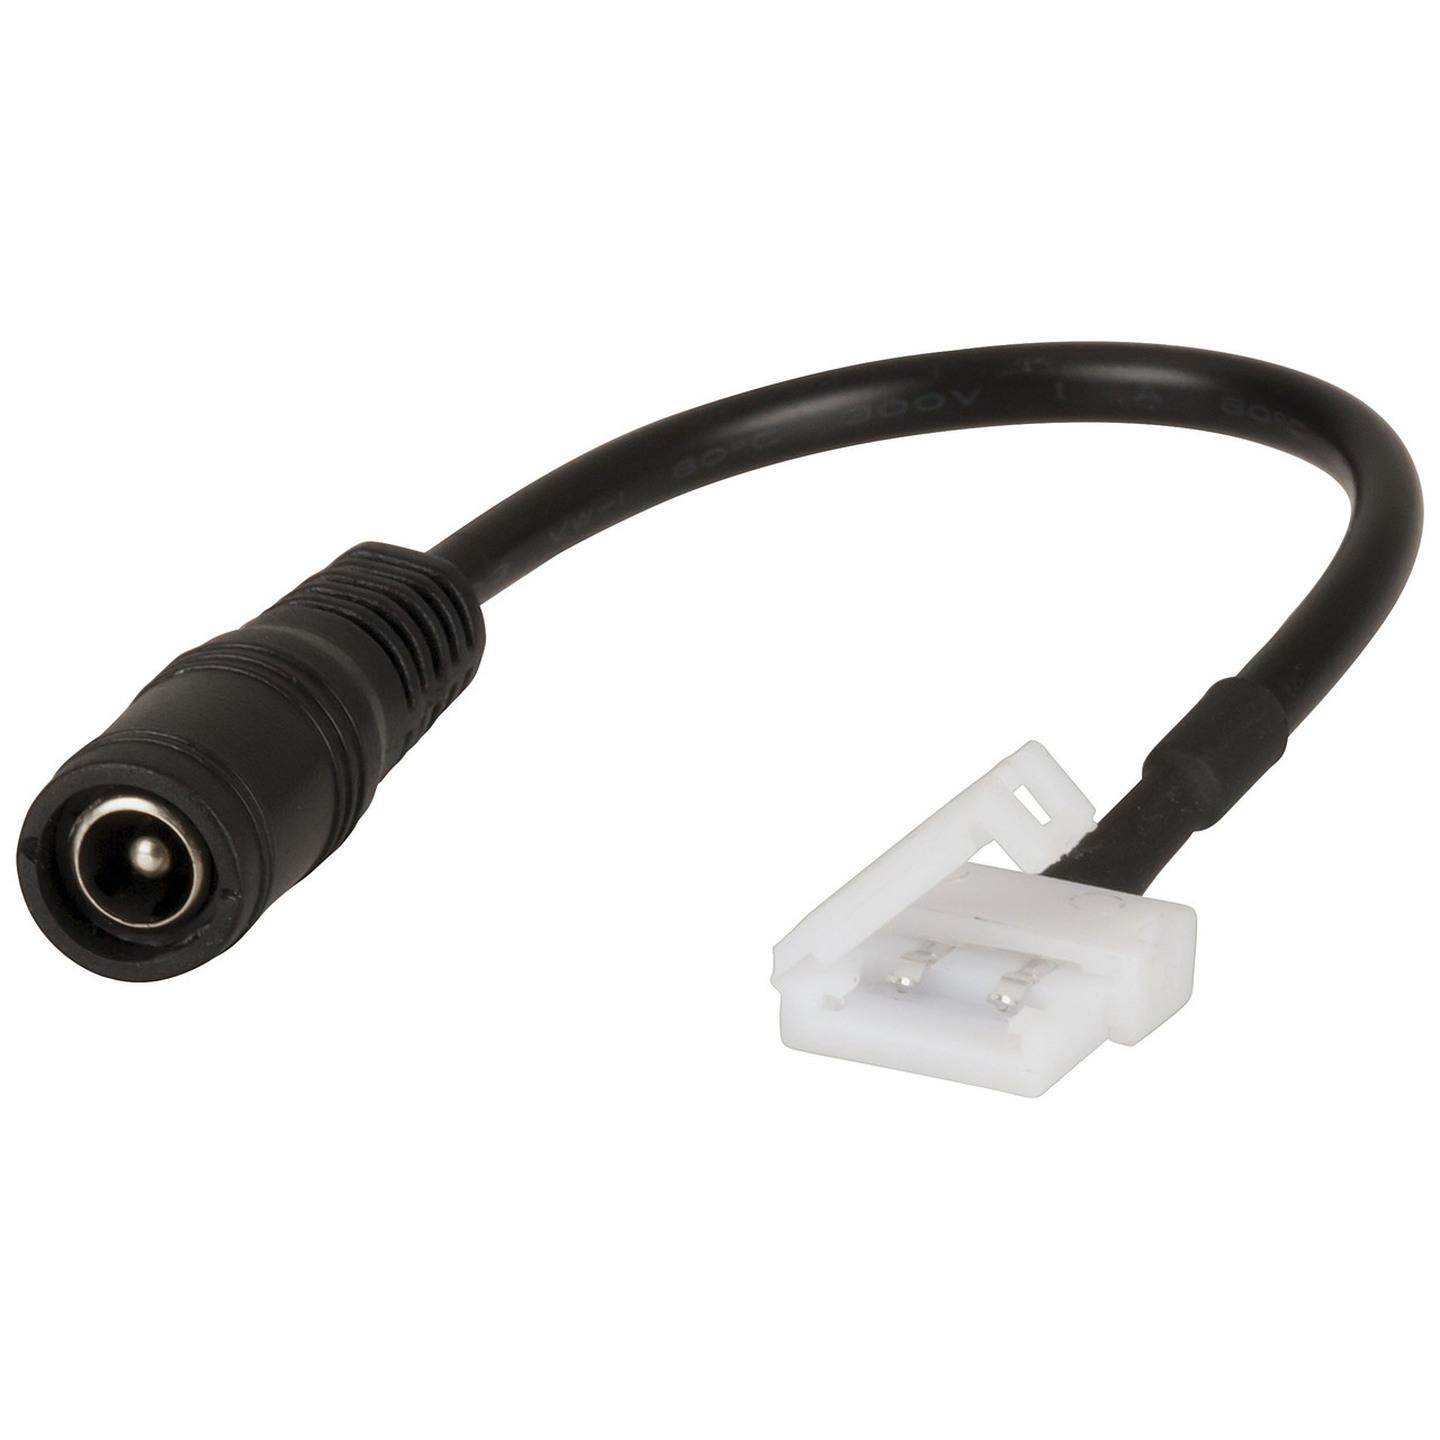 2 Pin LED Strip Connector to 2.1mm DC Socket